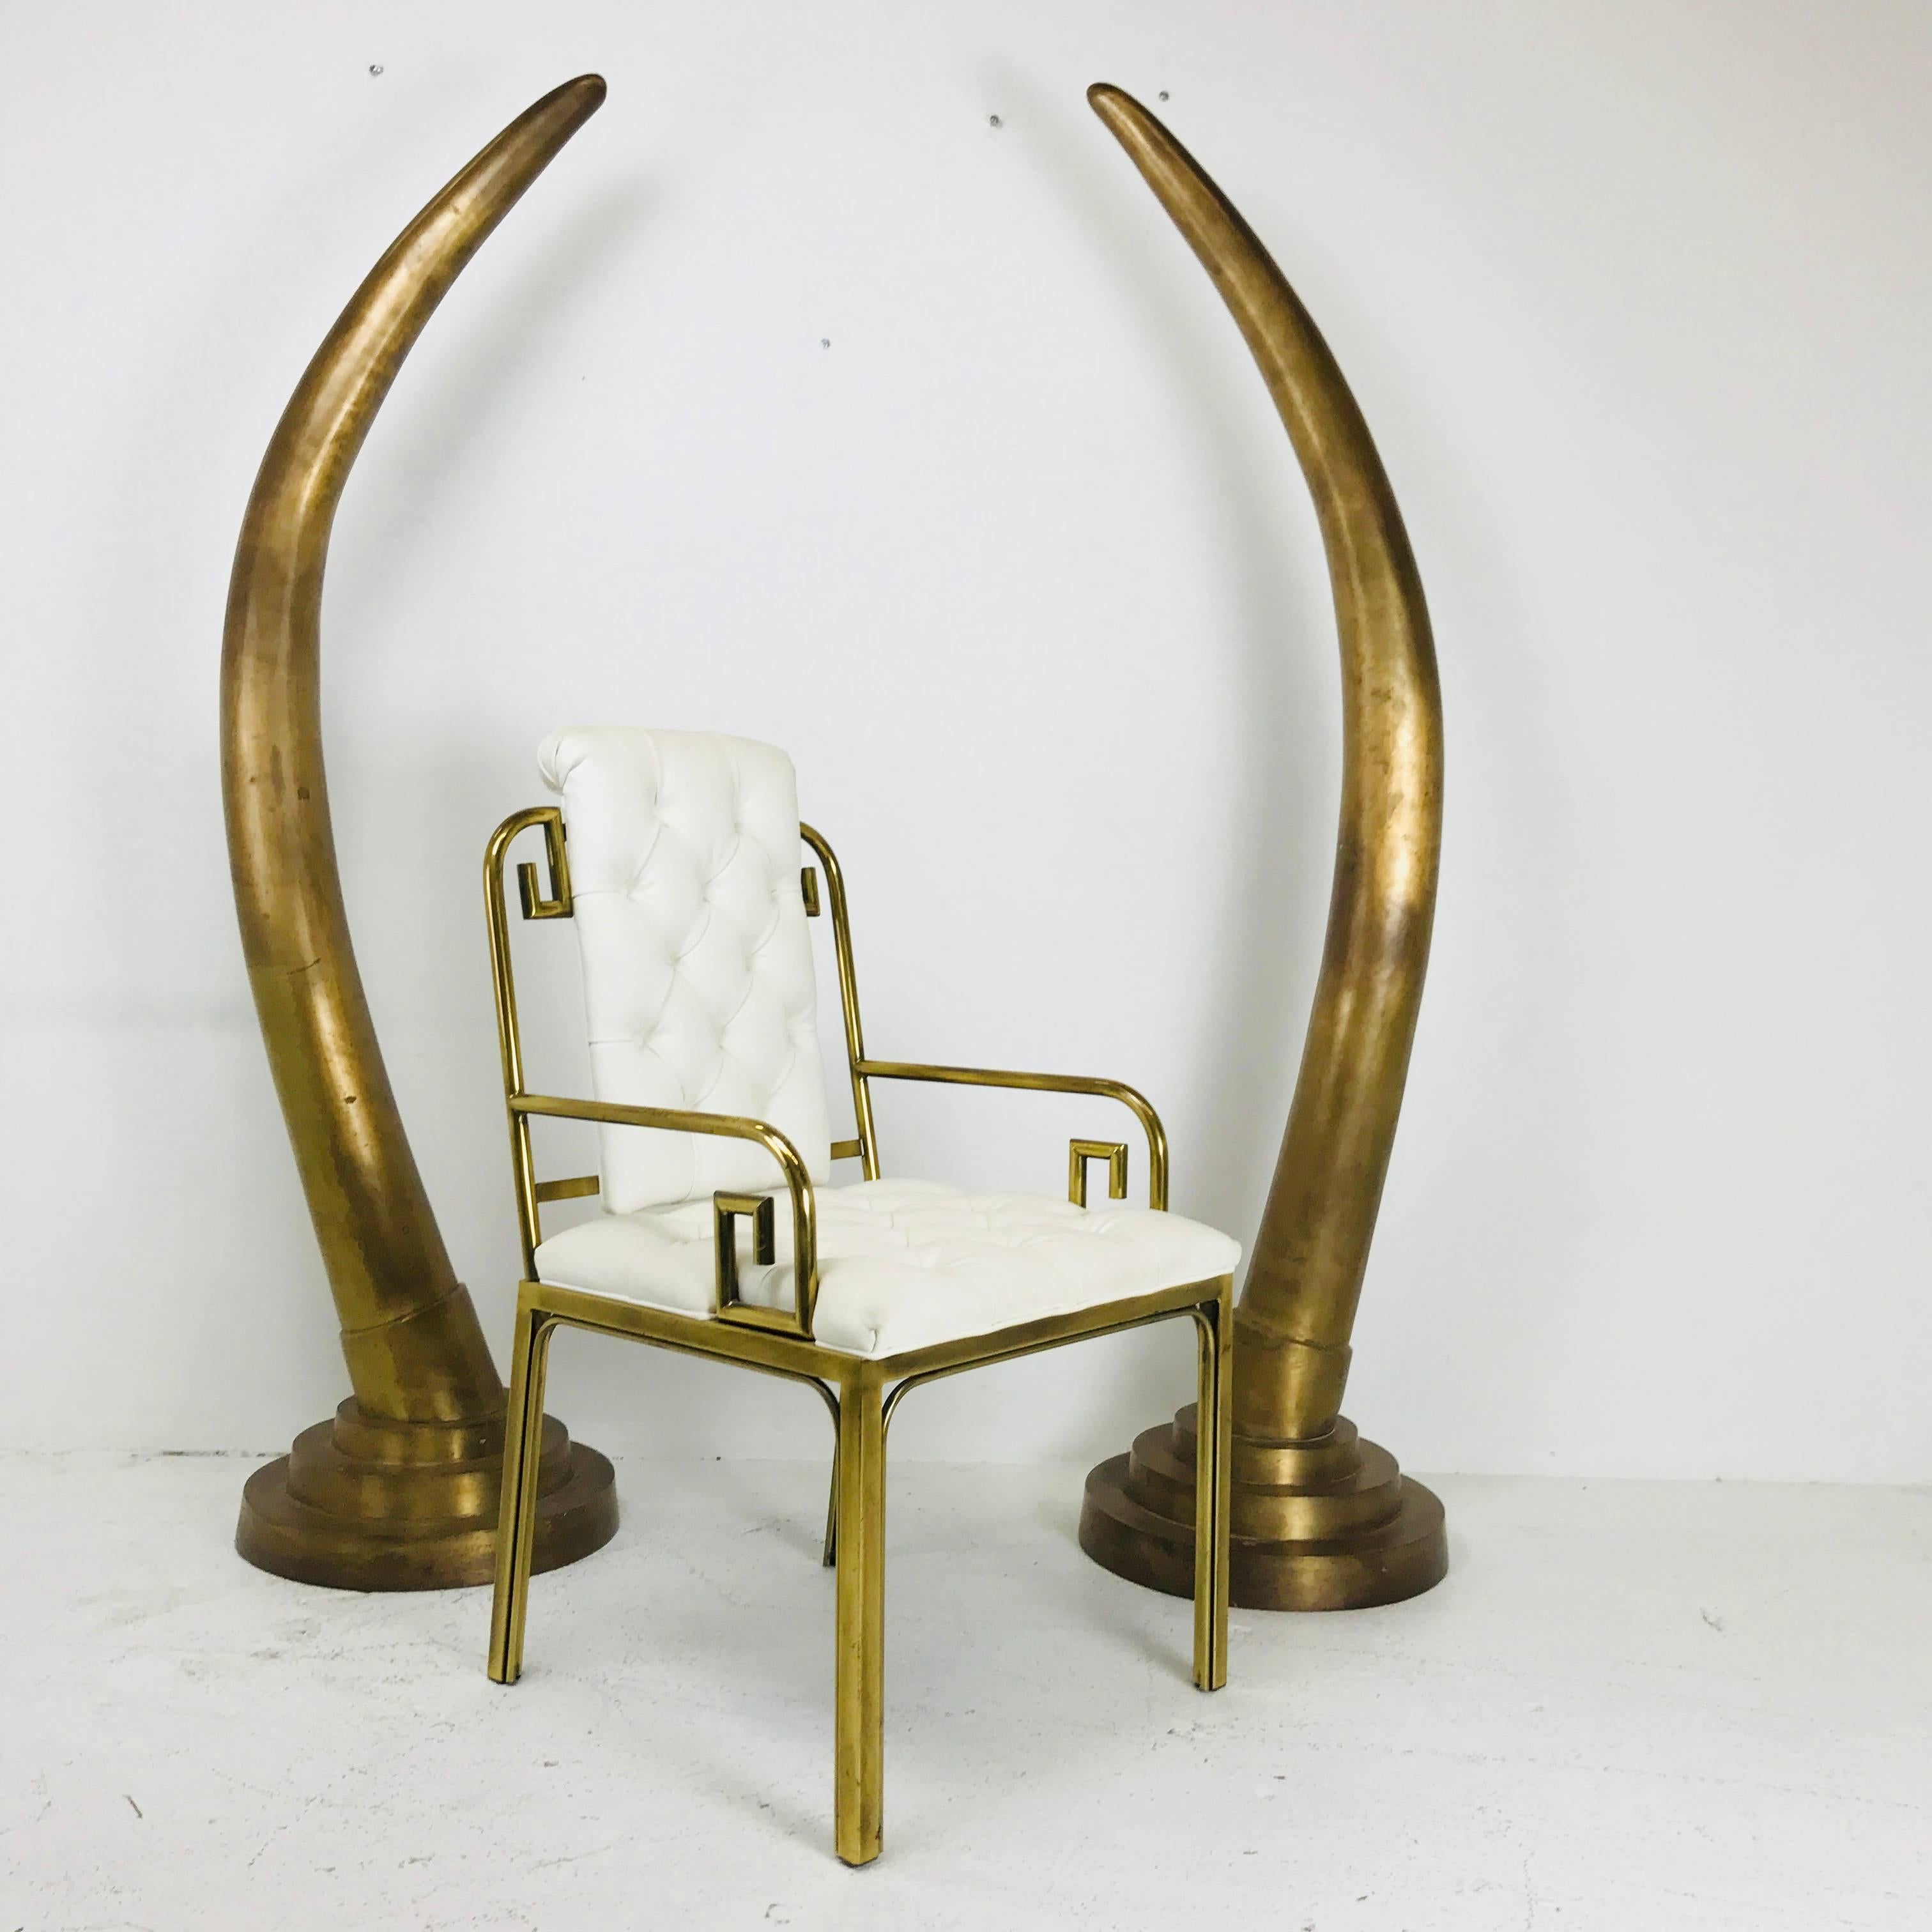 Pair of Dramatic Life-Size Brass Tusk Statues 1